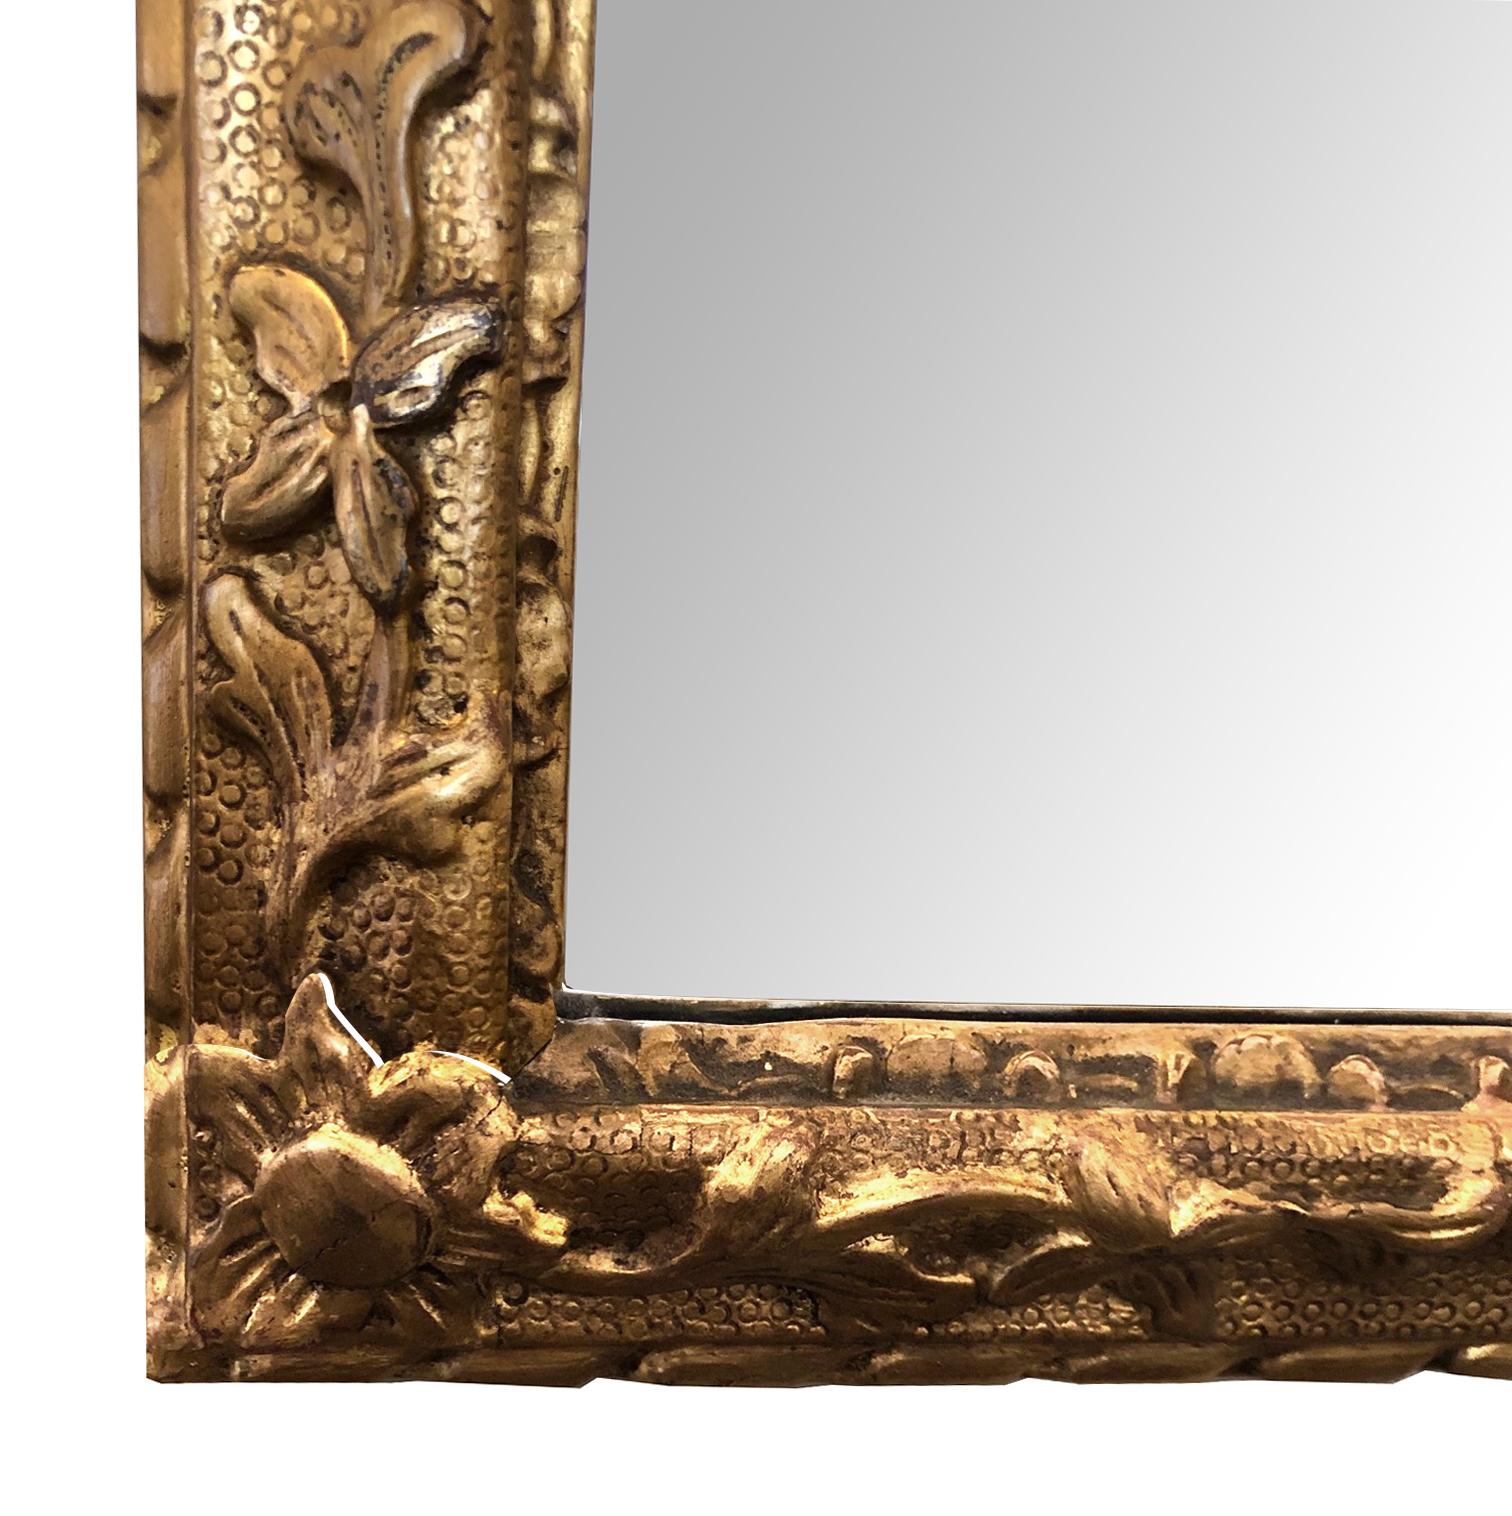 The exuberantly carved openwork crest composed of dramatic interlacing C-scroll motifs with floral and foliate elements cascading down the sides; all surrounding the original beveled mirror plate within a relief-carved molding.